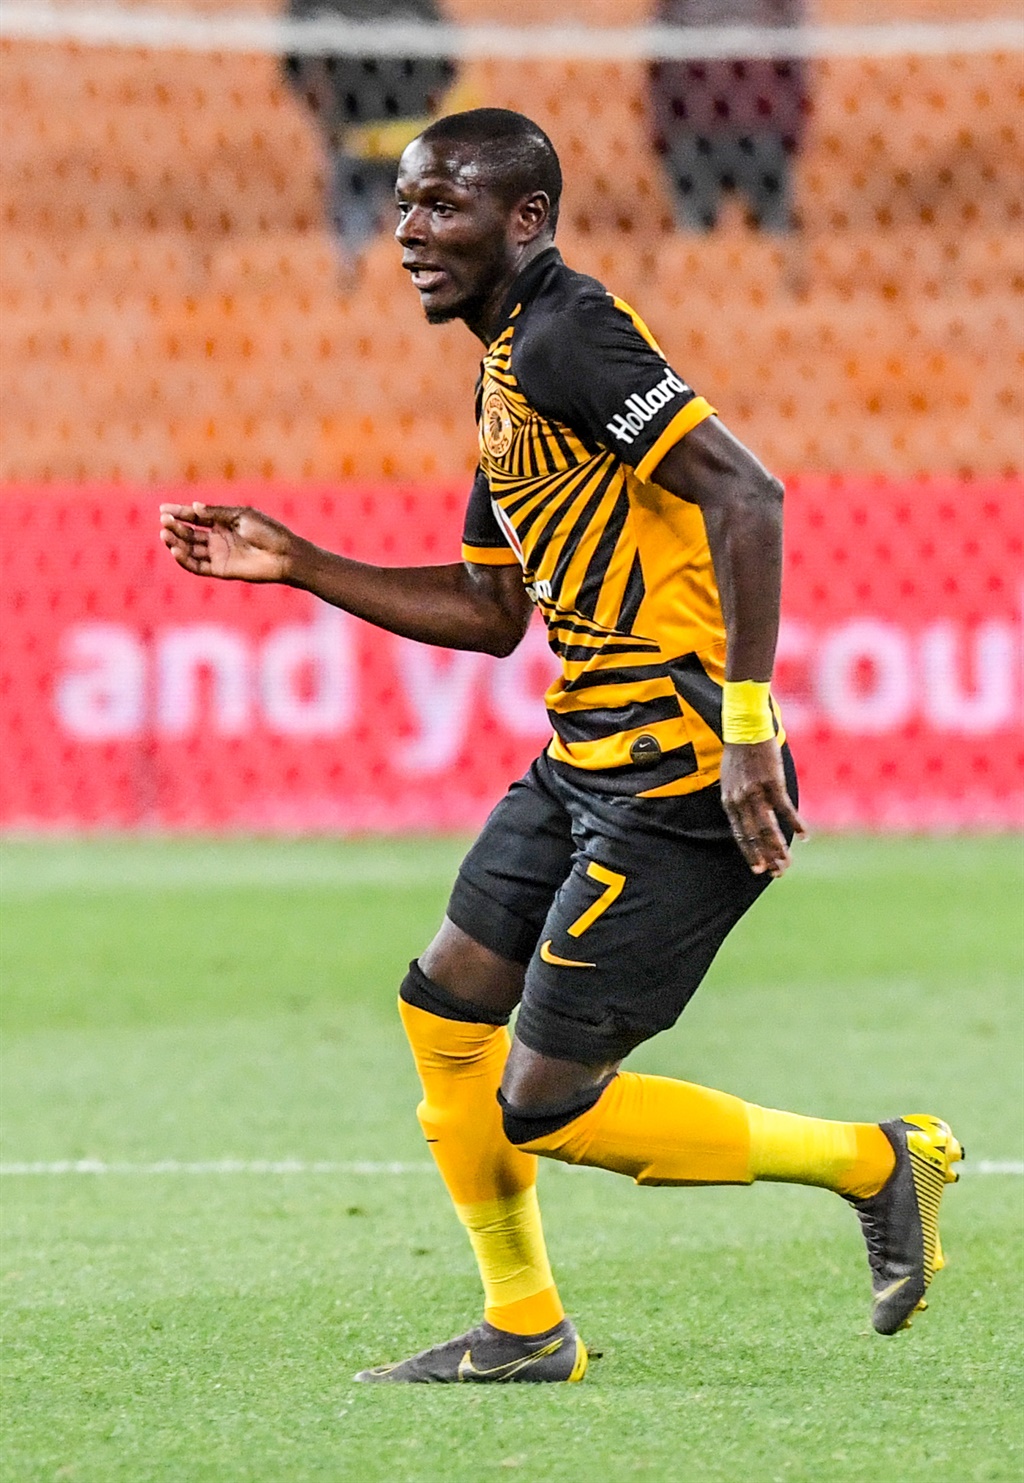  Lazalous Kambole of Kaizer Chiefs during Absa Premiership match between Kaizer Chiefs and Golden Arrows at FNB Stadium on October 01, 2019 in Johannesburg, South Africa. (Photo by Sydney Seshibedi/Gallo Images)